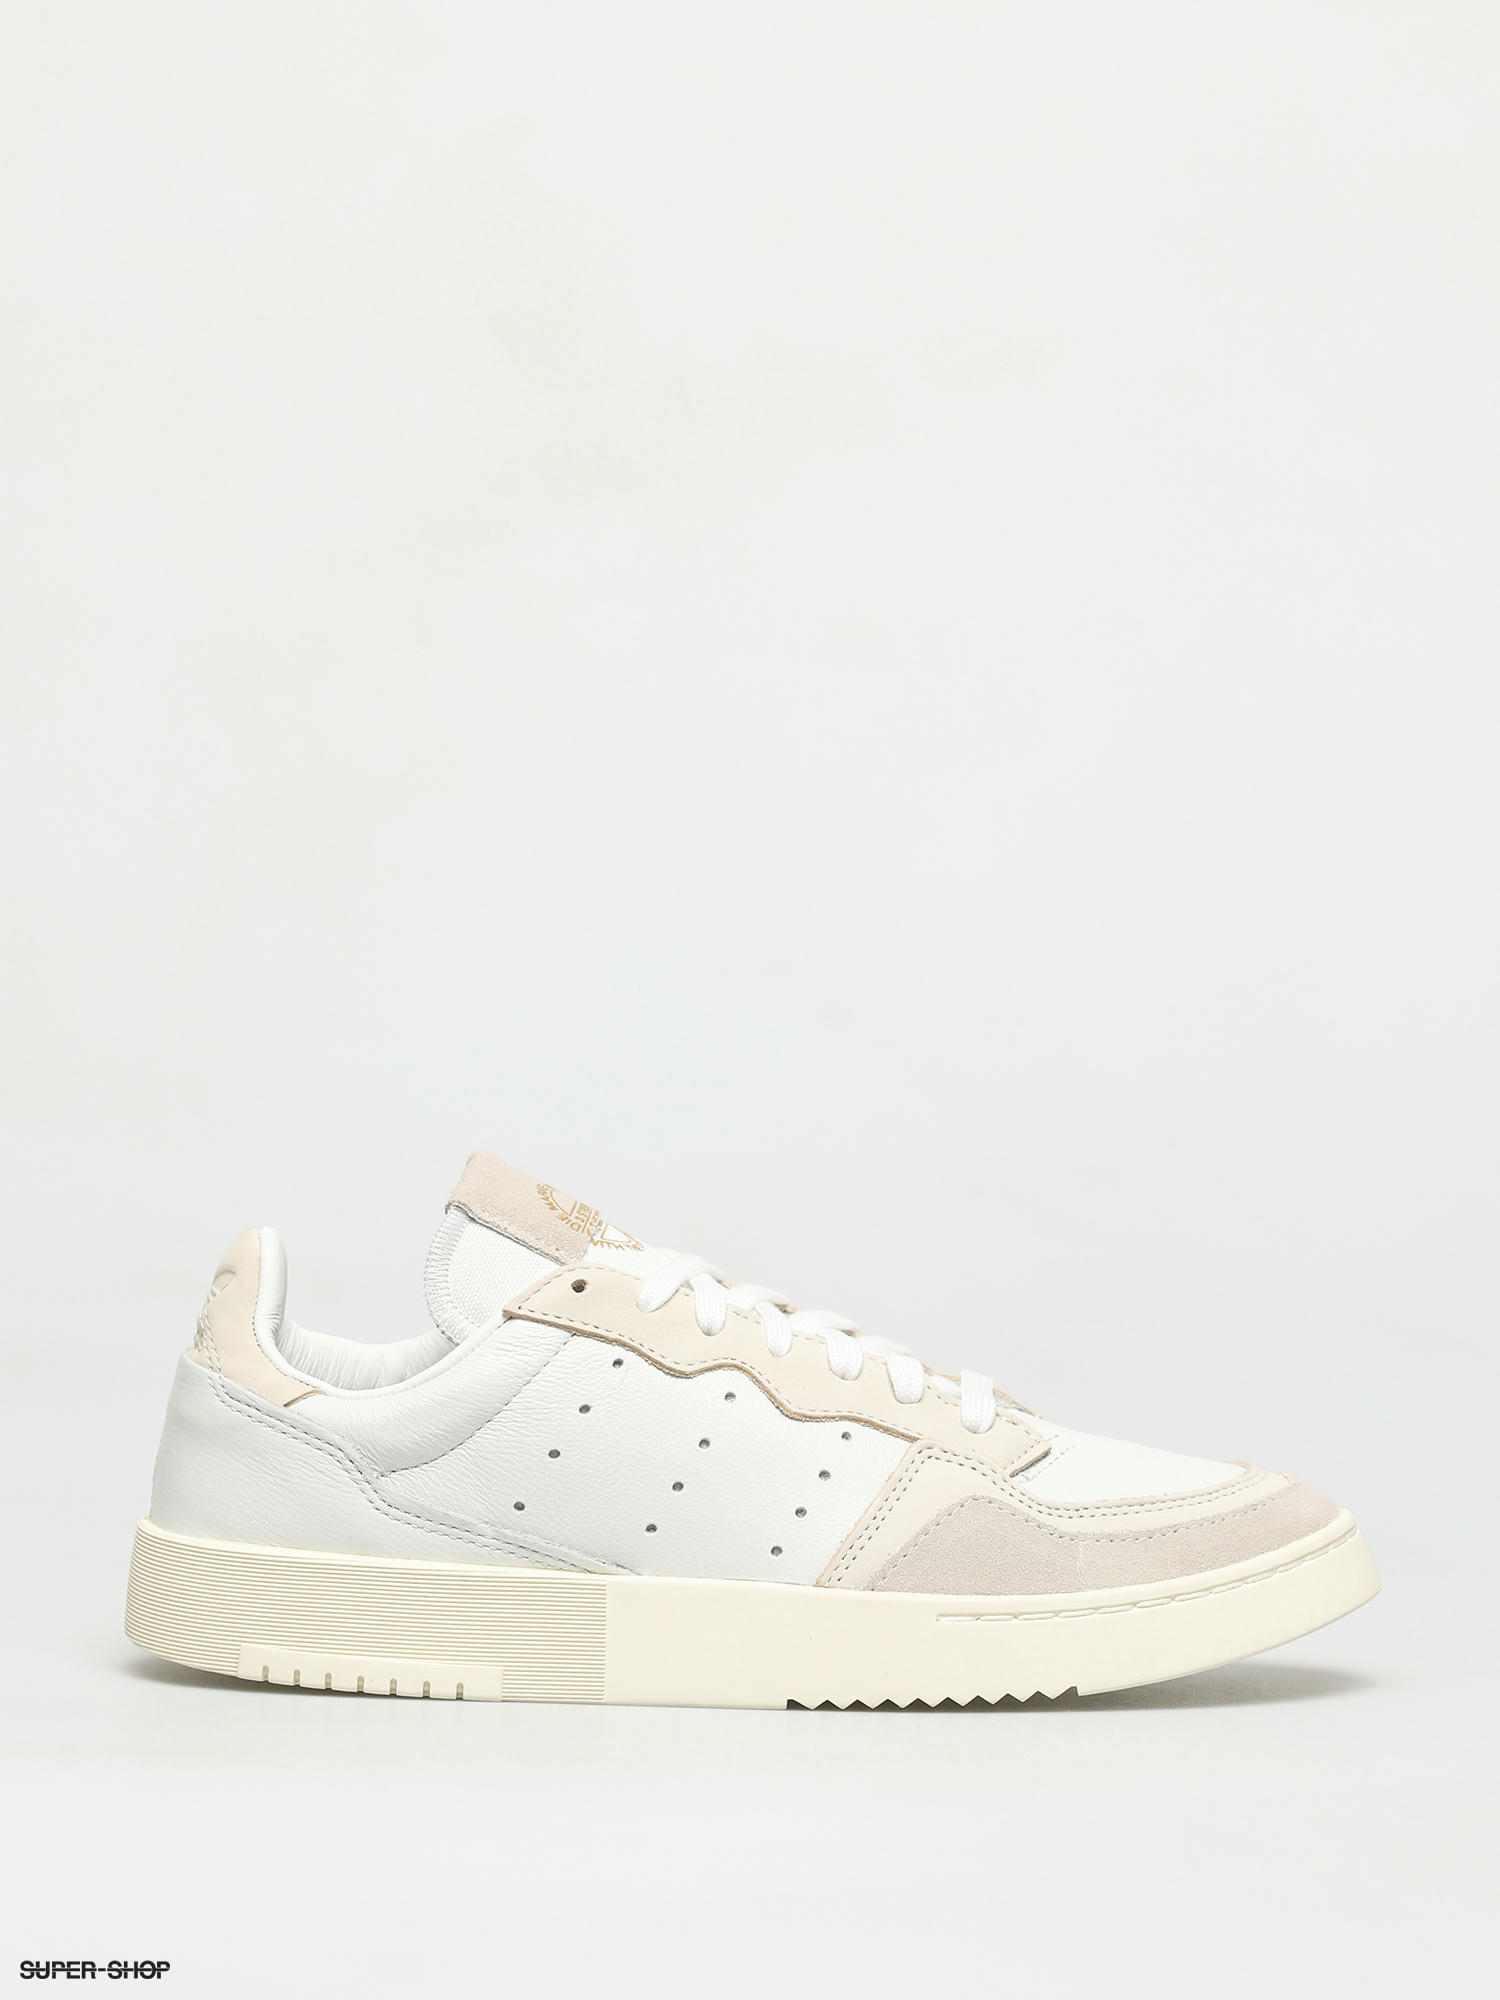 casual Advertiser hell adidas Originals Supercourt Shoes (crystal white/chalk white/off white)